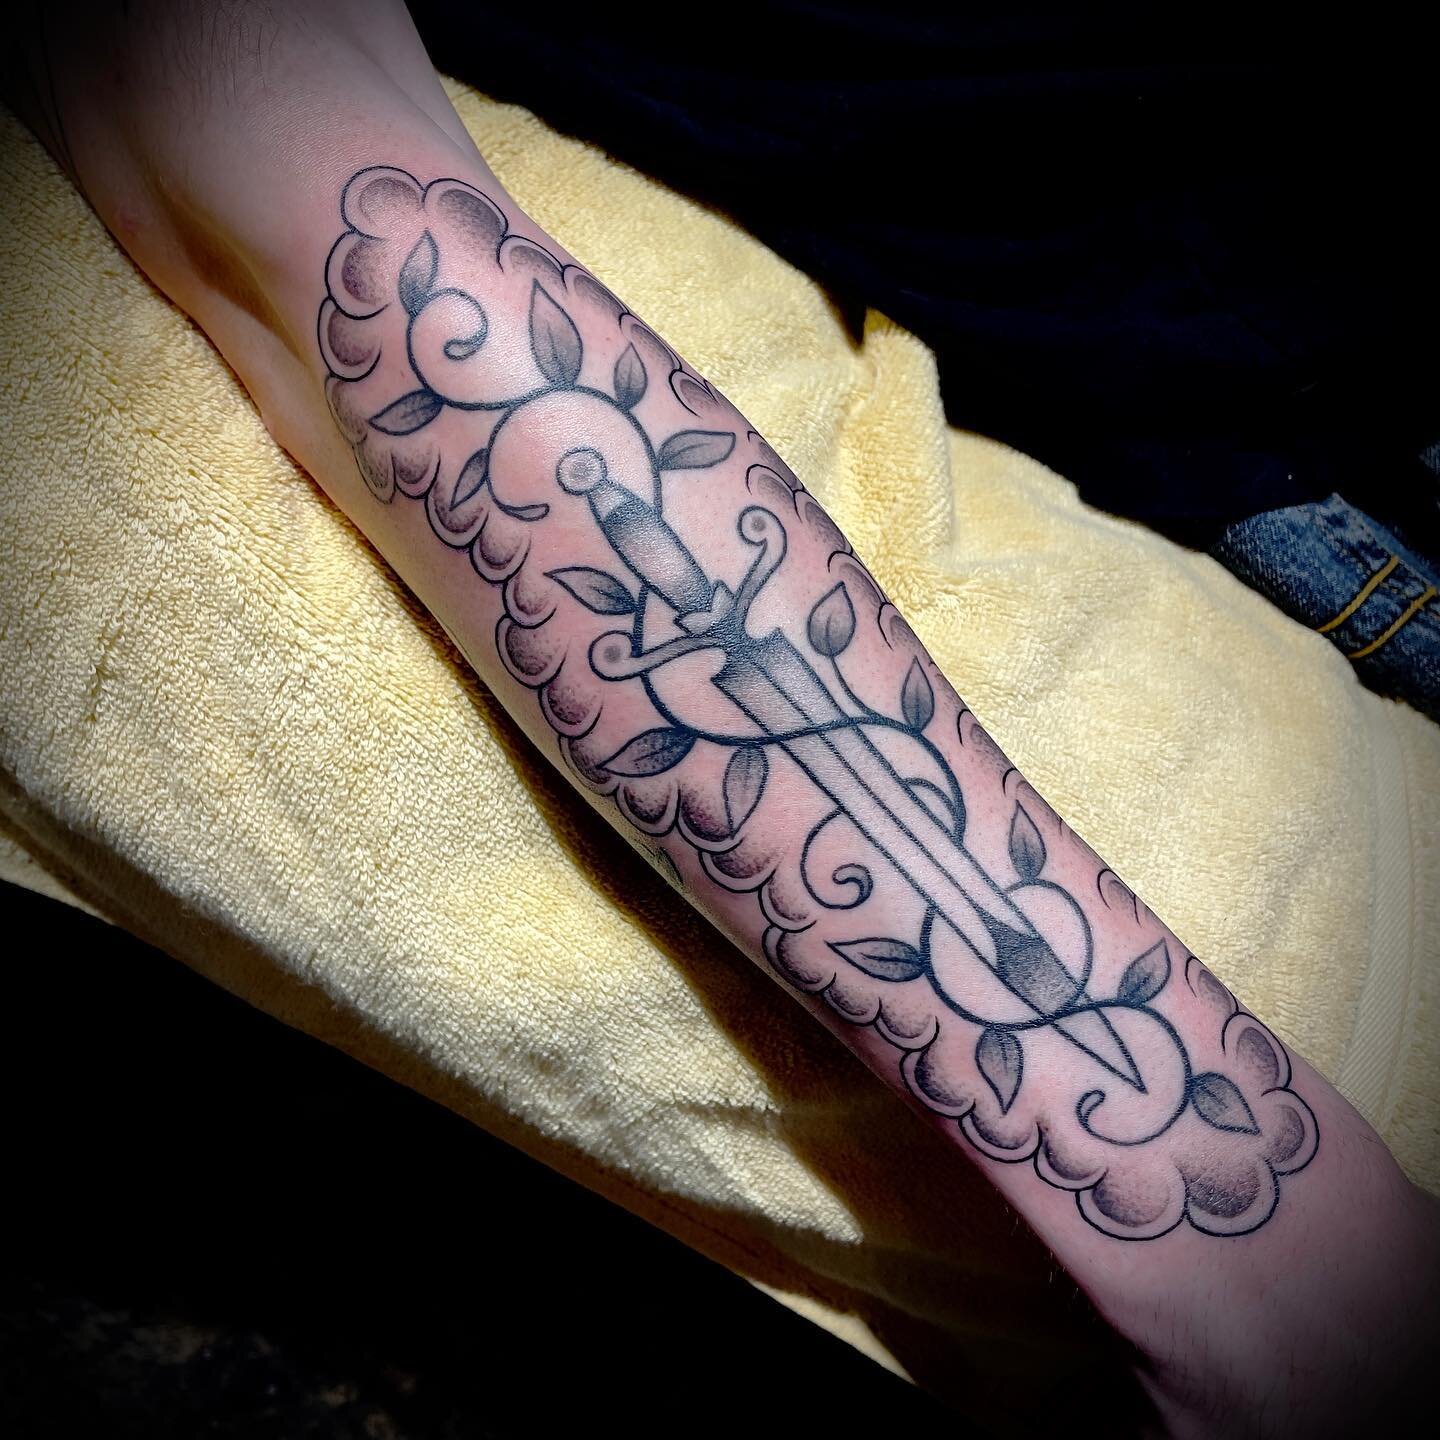 Added some clouds around Mr. Jaden&lsquo;s sword and ivy, the others are recent, healed works